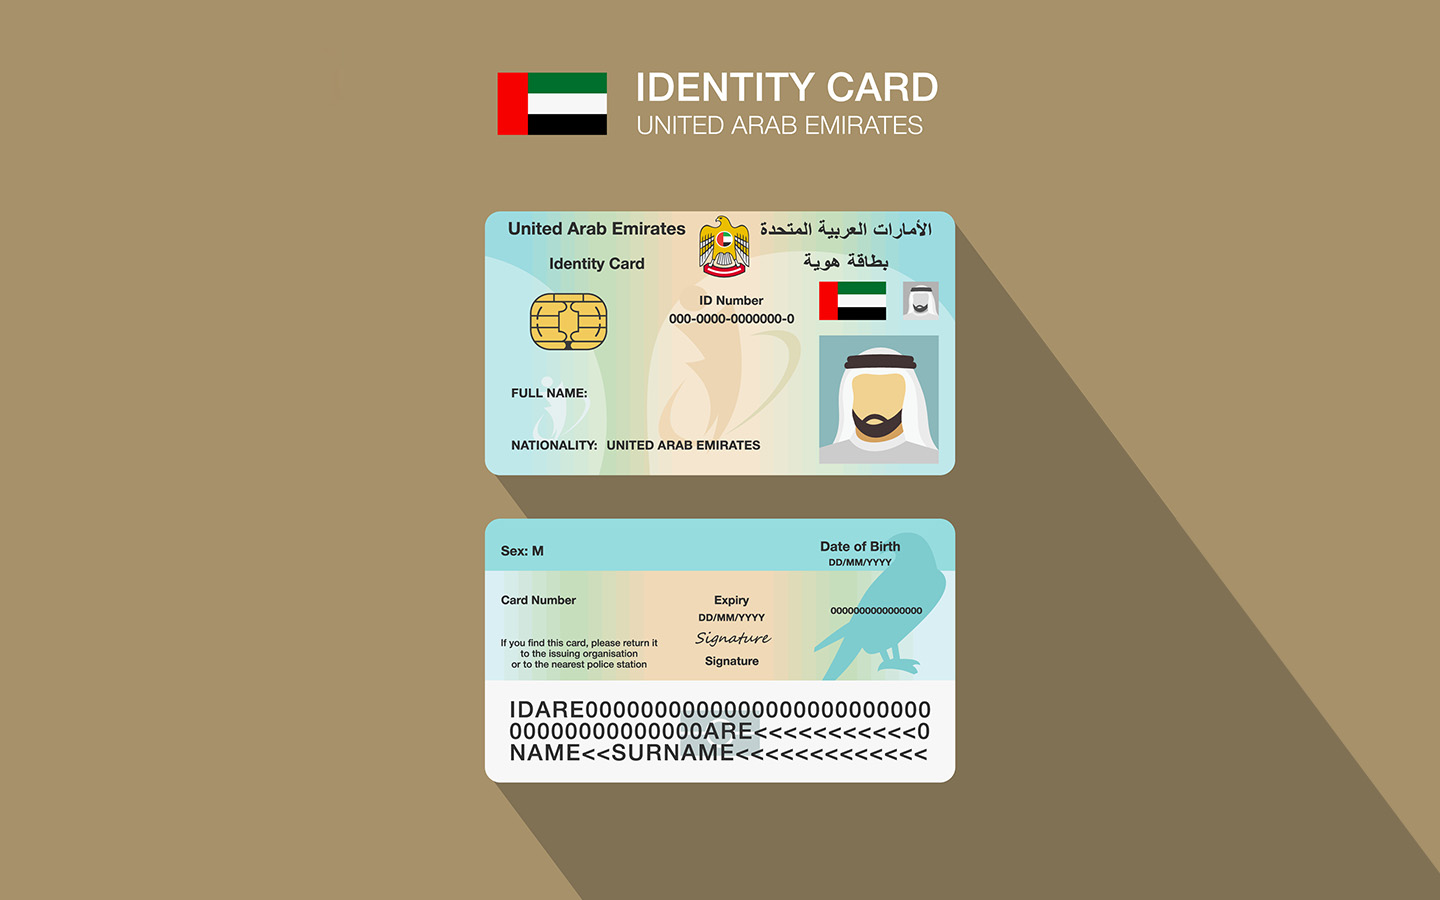 Emirates ID is compulsory to apply for the certificate